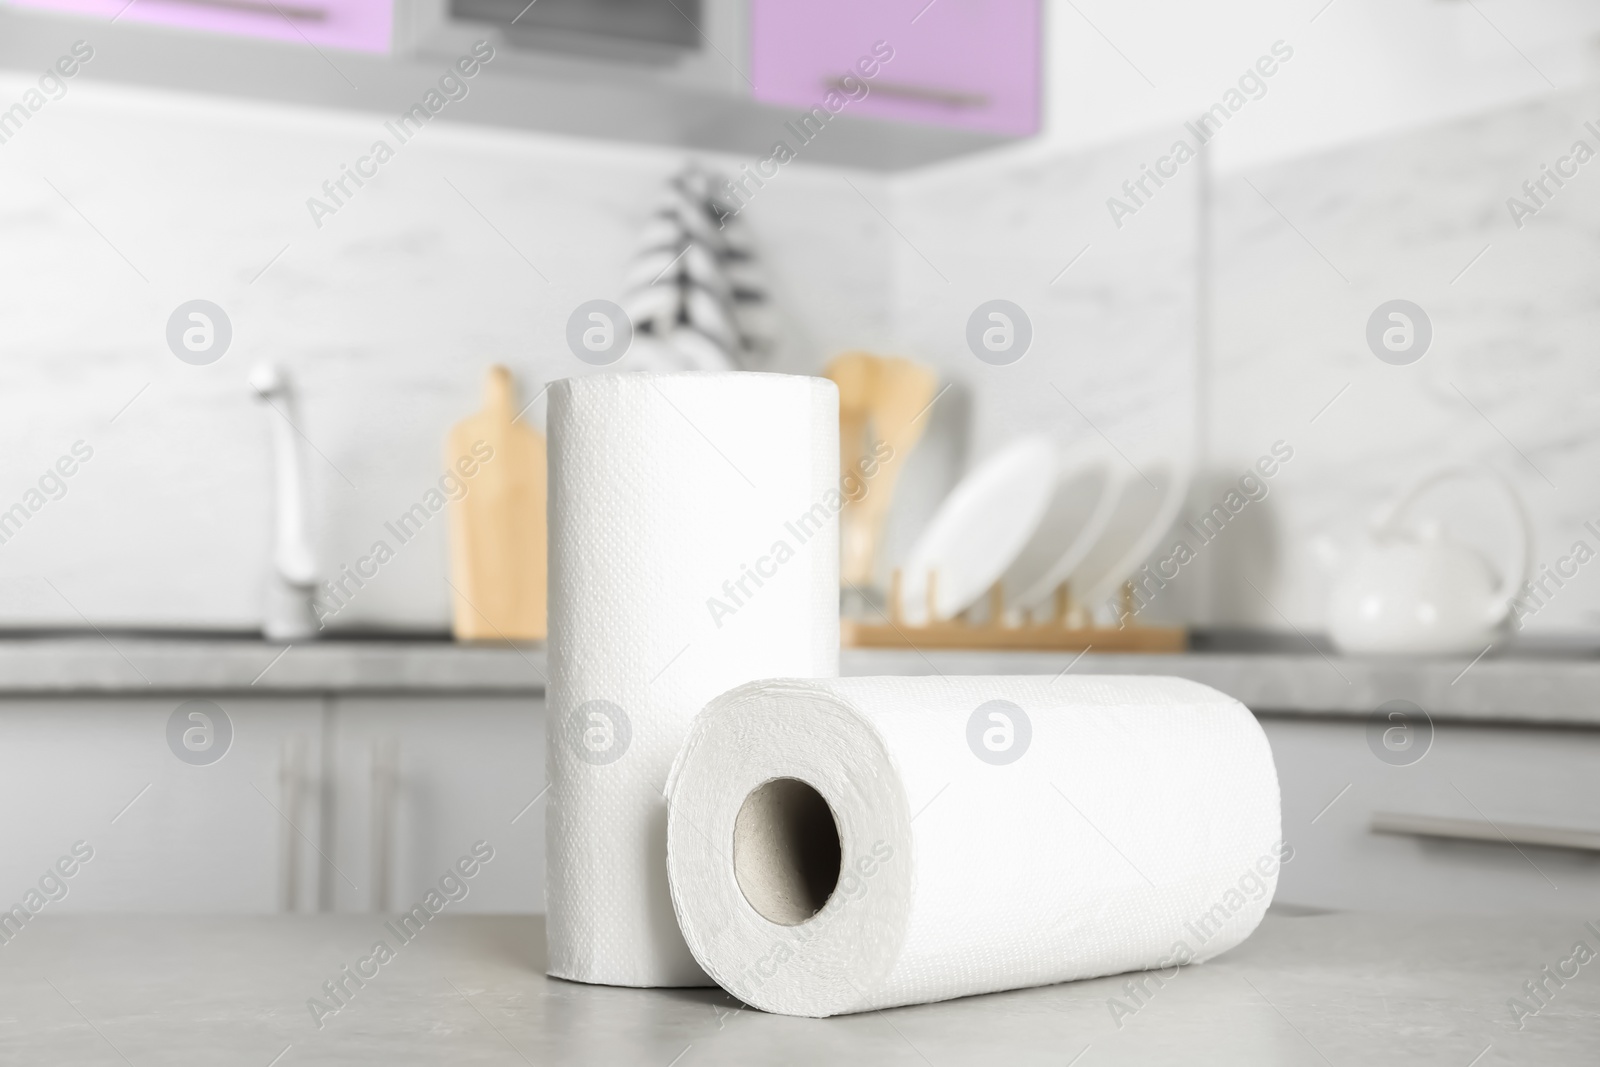 Photo of Rolls of paper towels on light grey table in kitchen